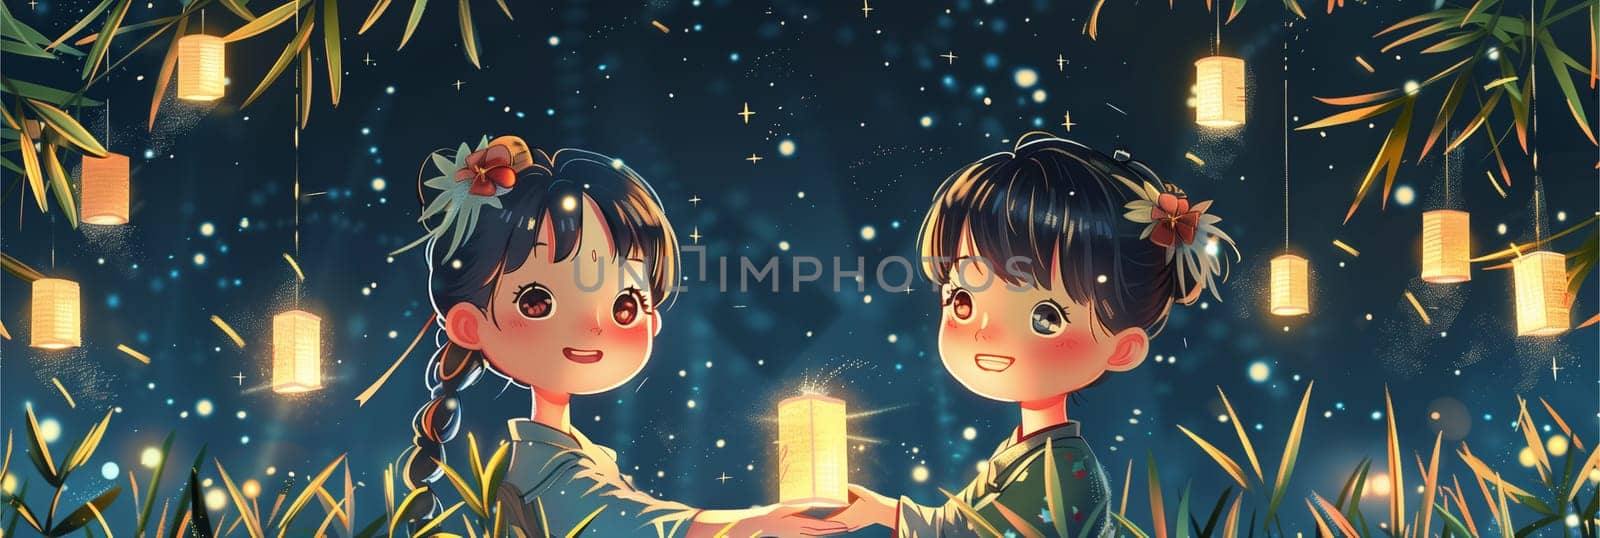 Twin girls with matching outfits and hairstyles joyfully hold a sparkling firework amidst a bamboo grove lit by floating lanterns under a starry sky.